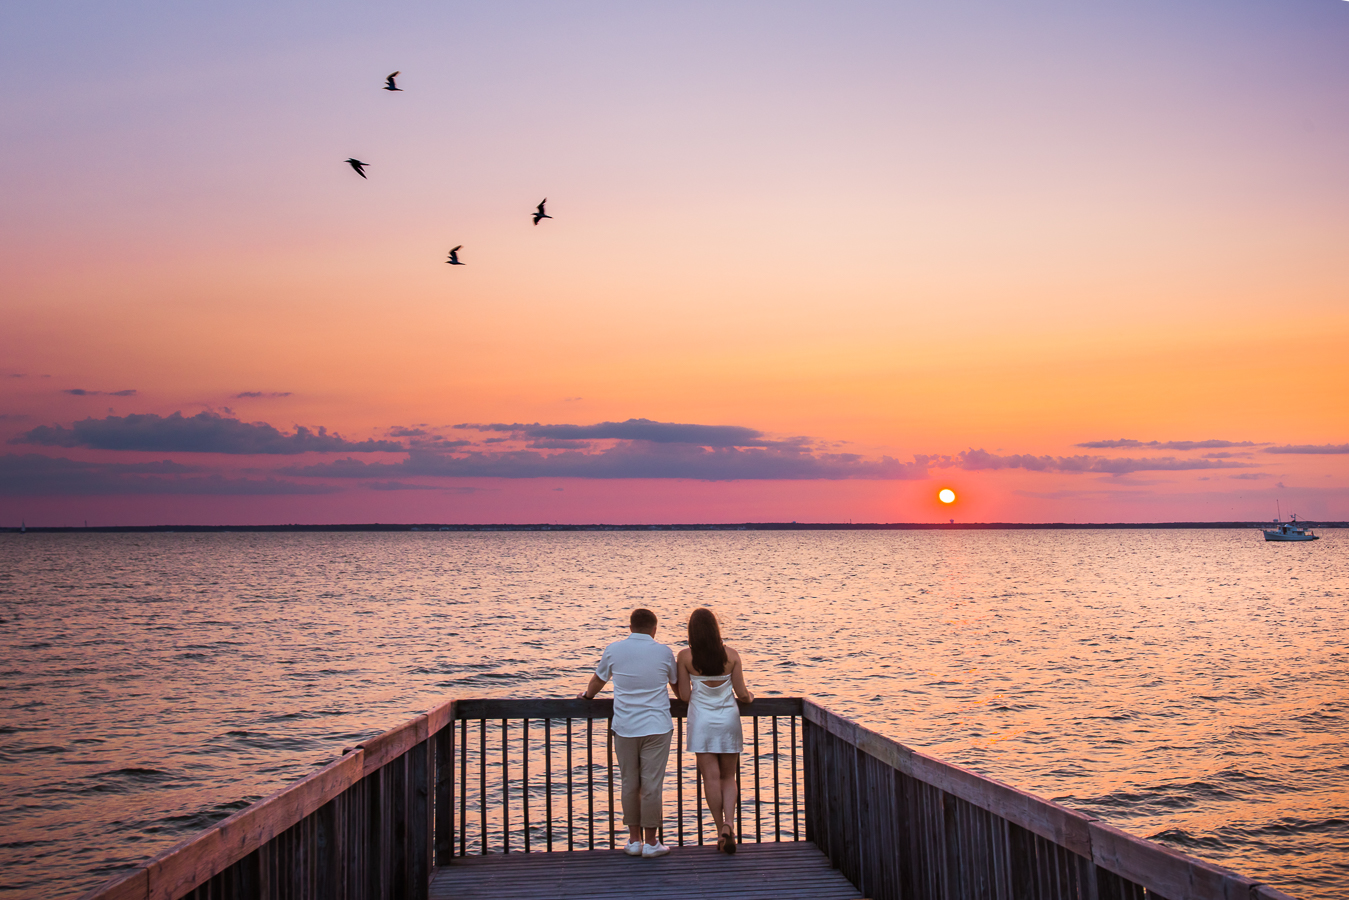 new jersey photographer, lisa rhinehart, captures this fun image of the couple watching the sunset together on the dock as the seagulls fly around them 